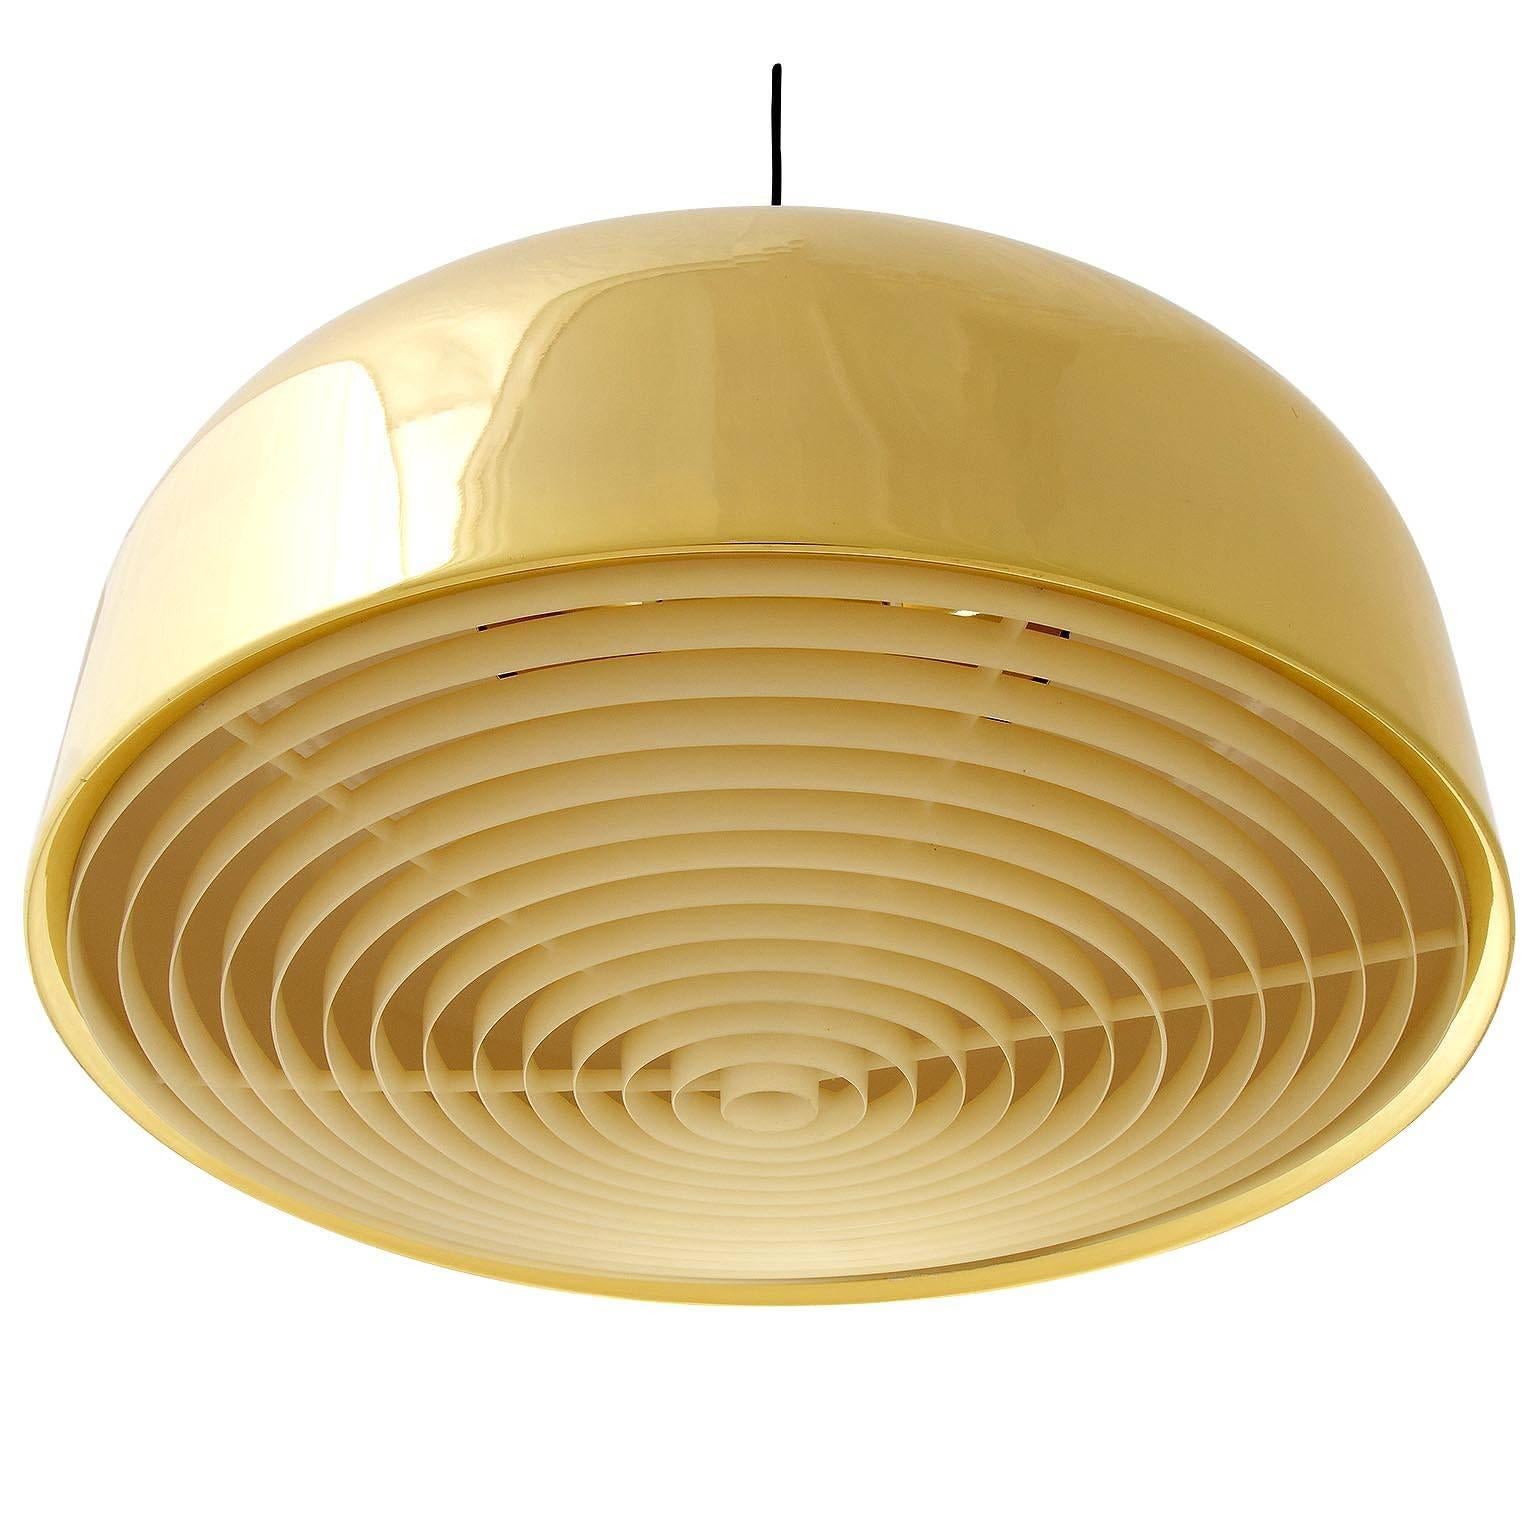 A large polished brass ceiling lamp model 'Knubbling' designed by Anders Pehrson in 1971 and manufactured in Mid-Century by Ateljé Lyktan in Sweden.
The fixture has been restored and is in very good condition.
We offer a customizing of the overall